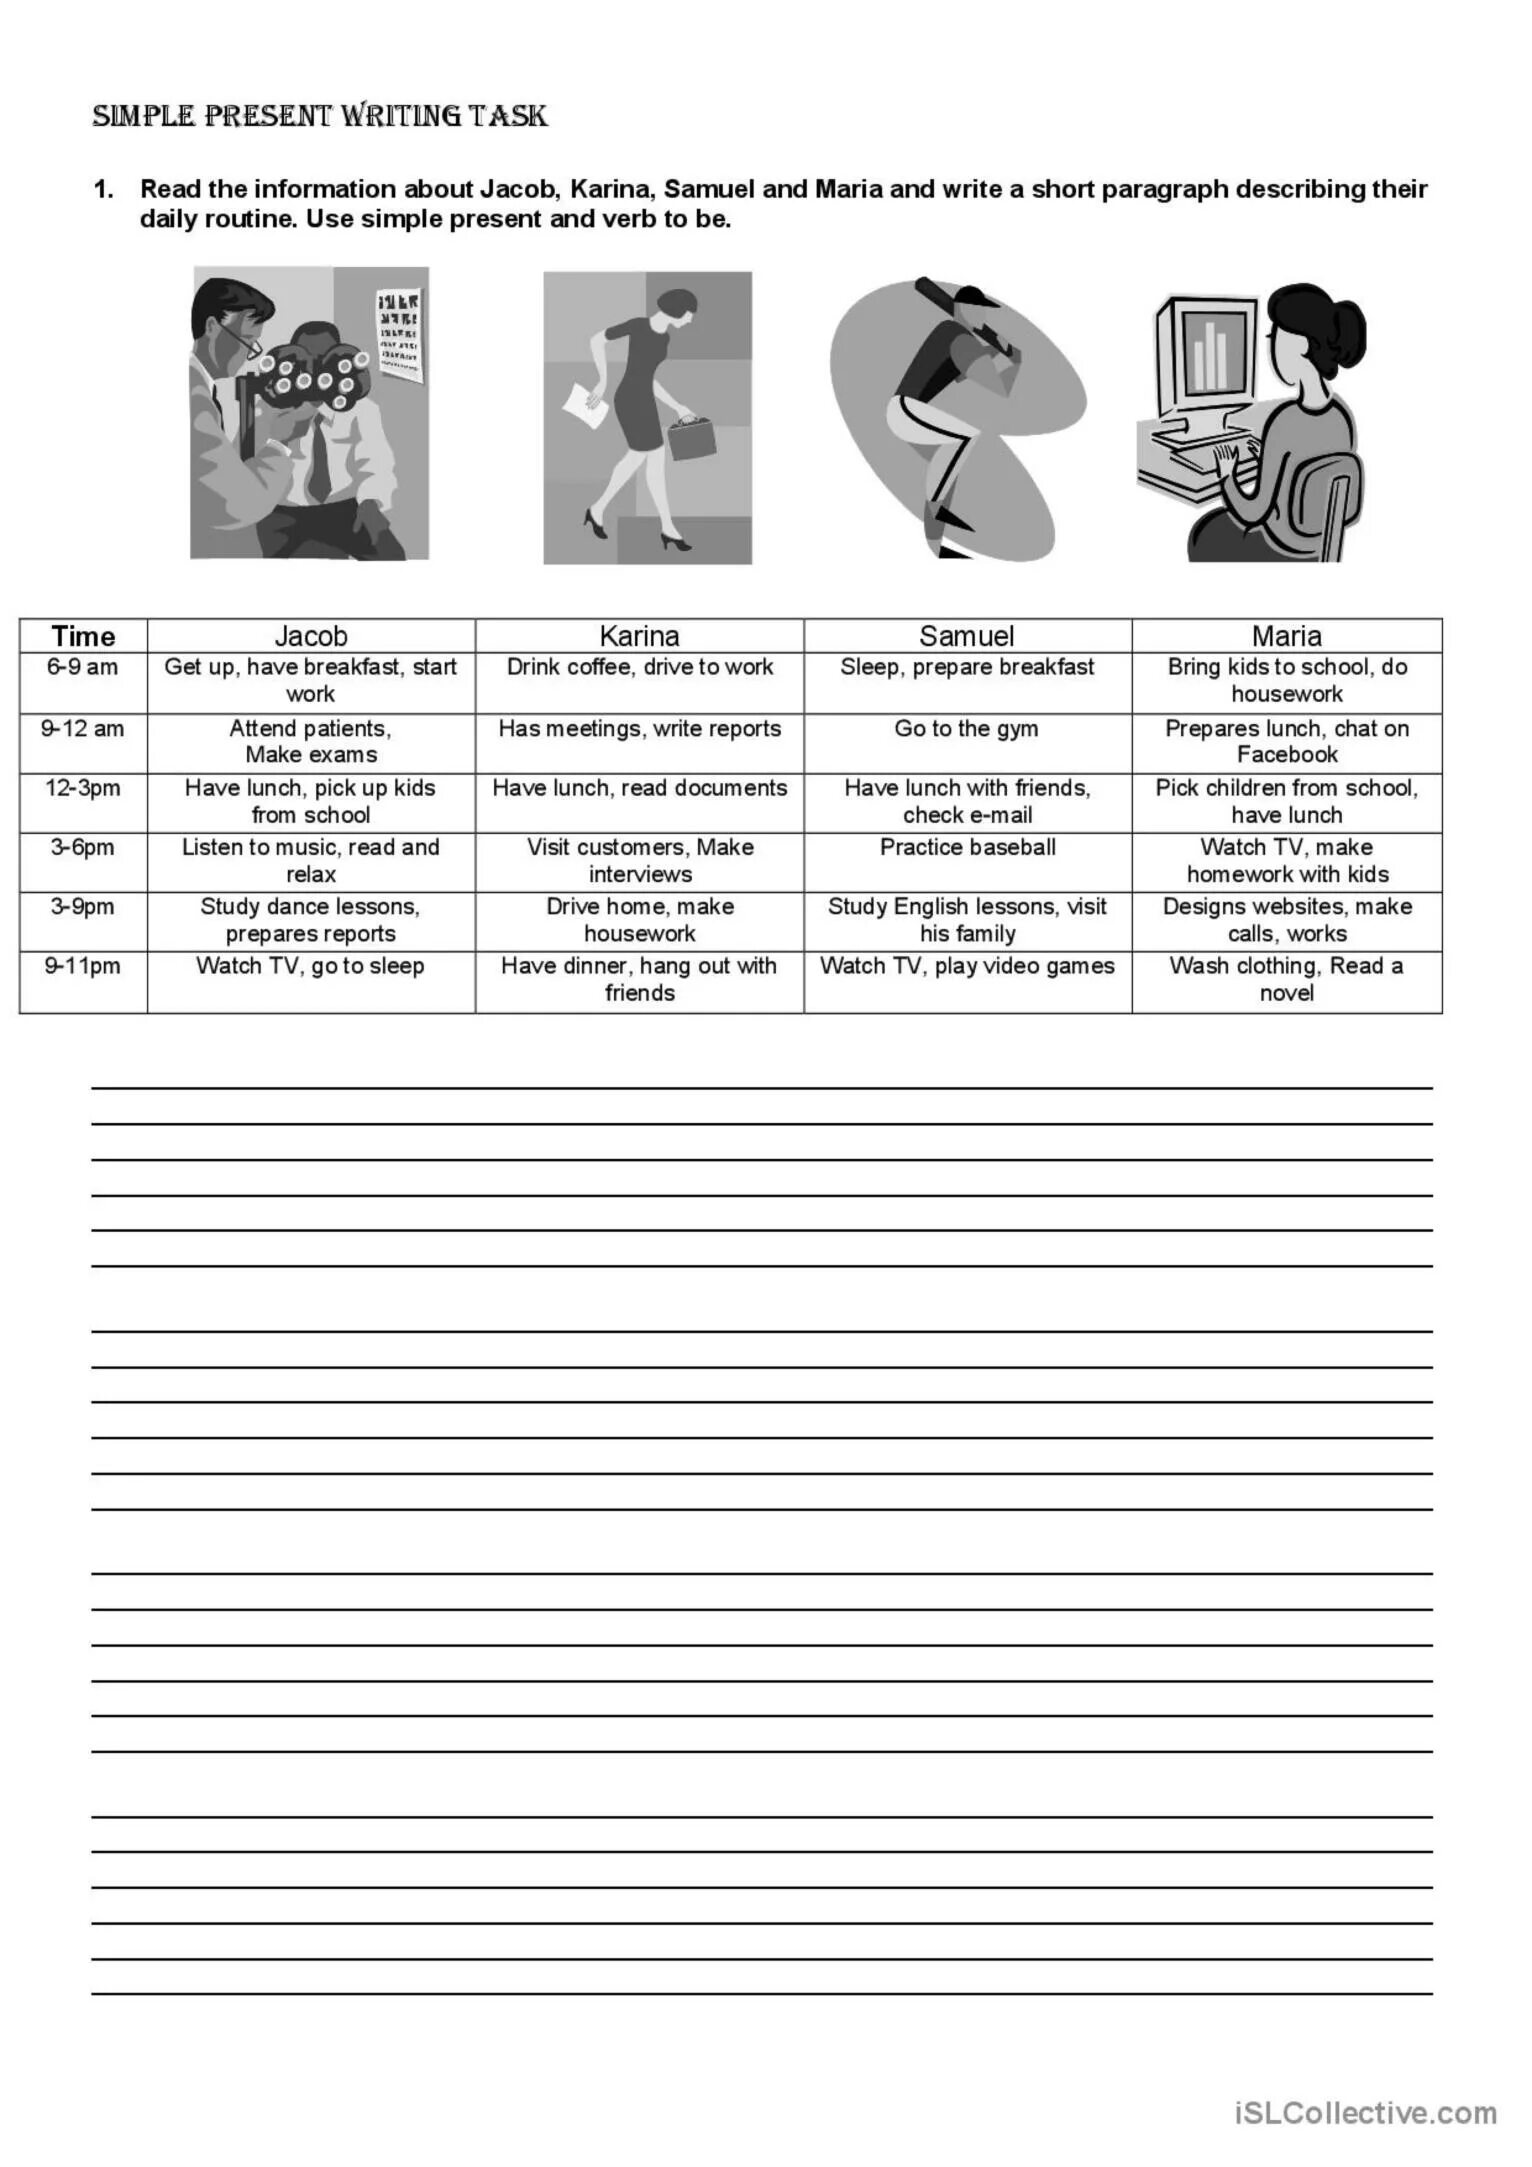 Texts for reading with tasks. Reading tasks for Elementary. Writing for Elementary Level. Writing exercises for Elementary. Do the task in writing